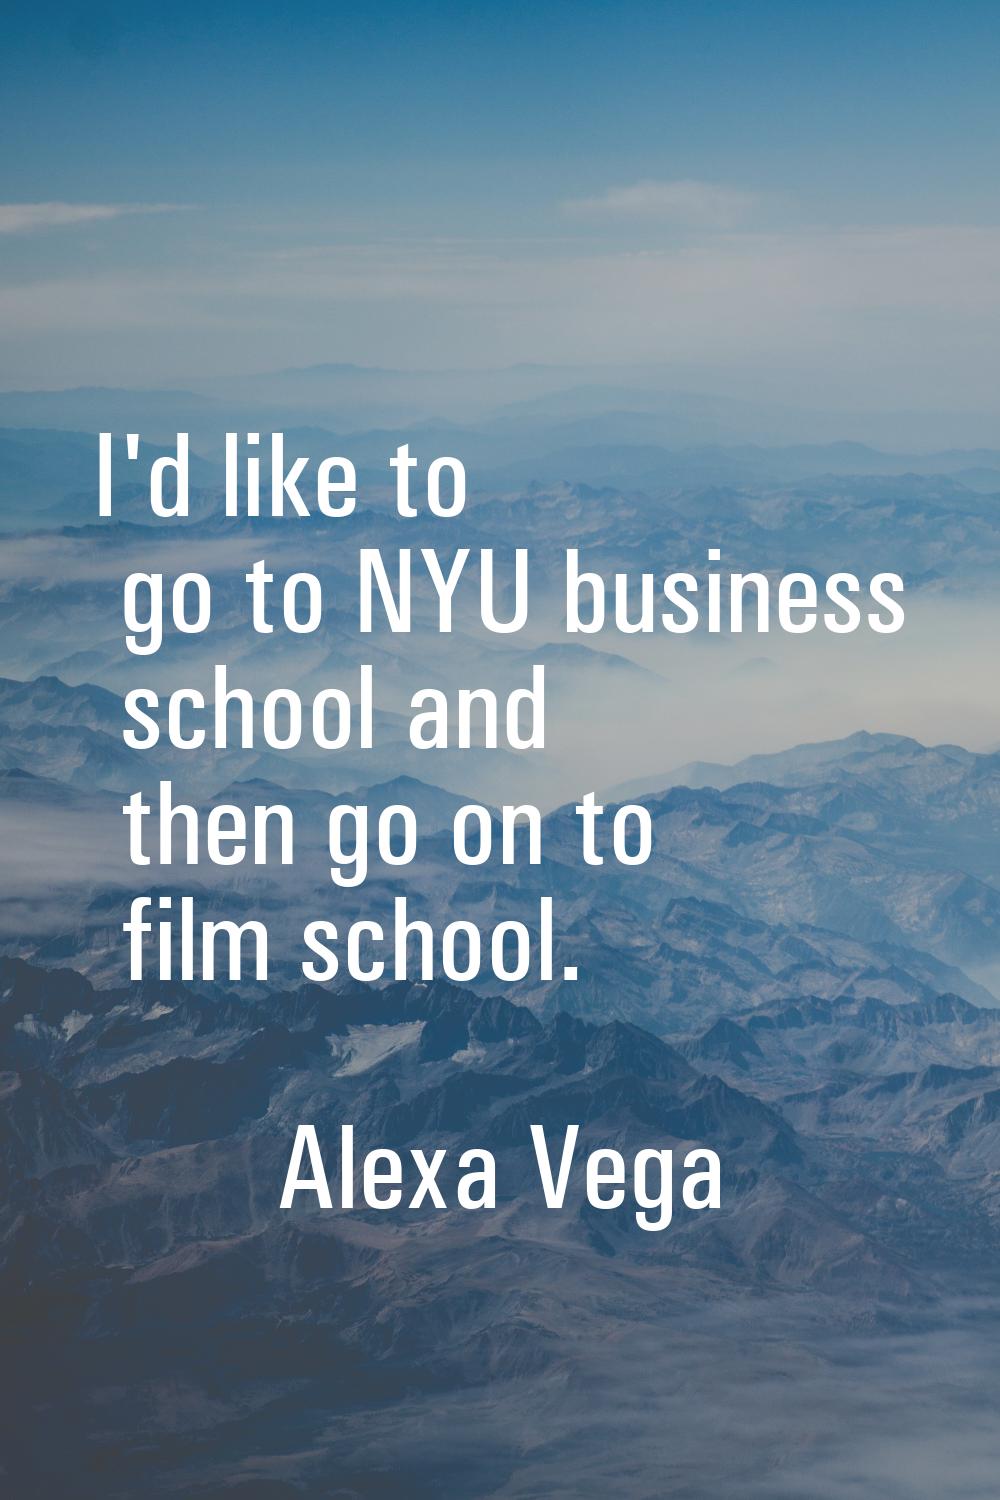 I'd like to go to NYU business school and then go on to film school.